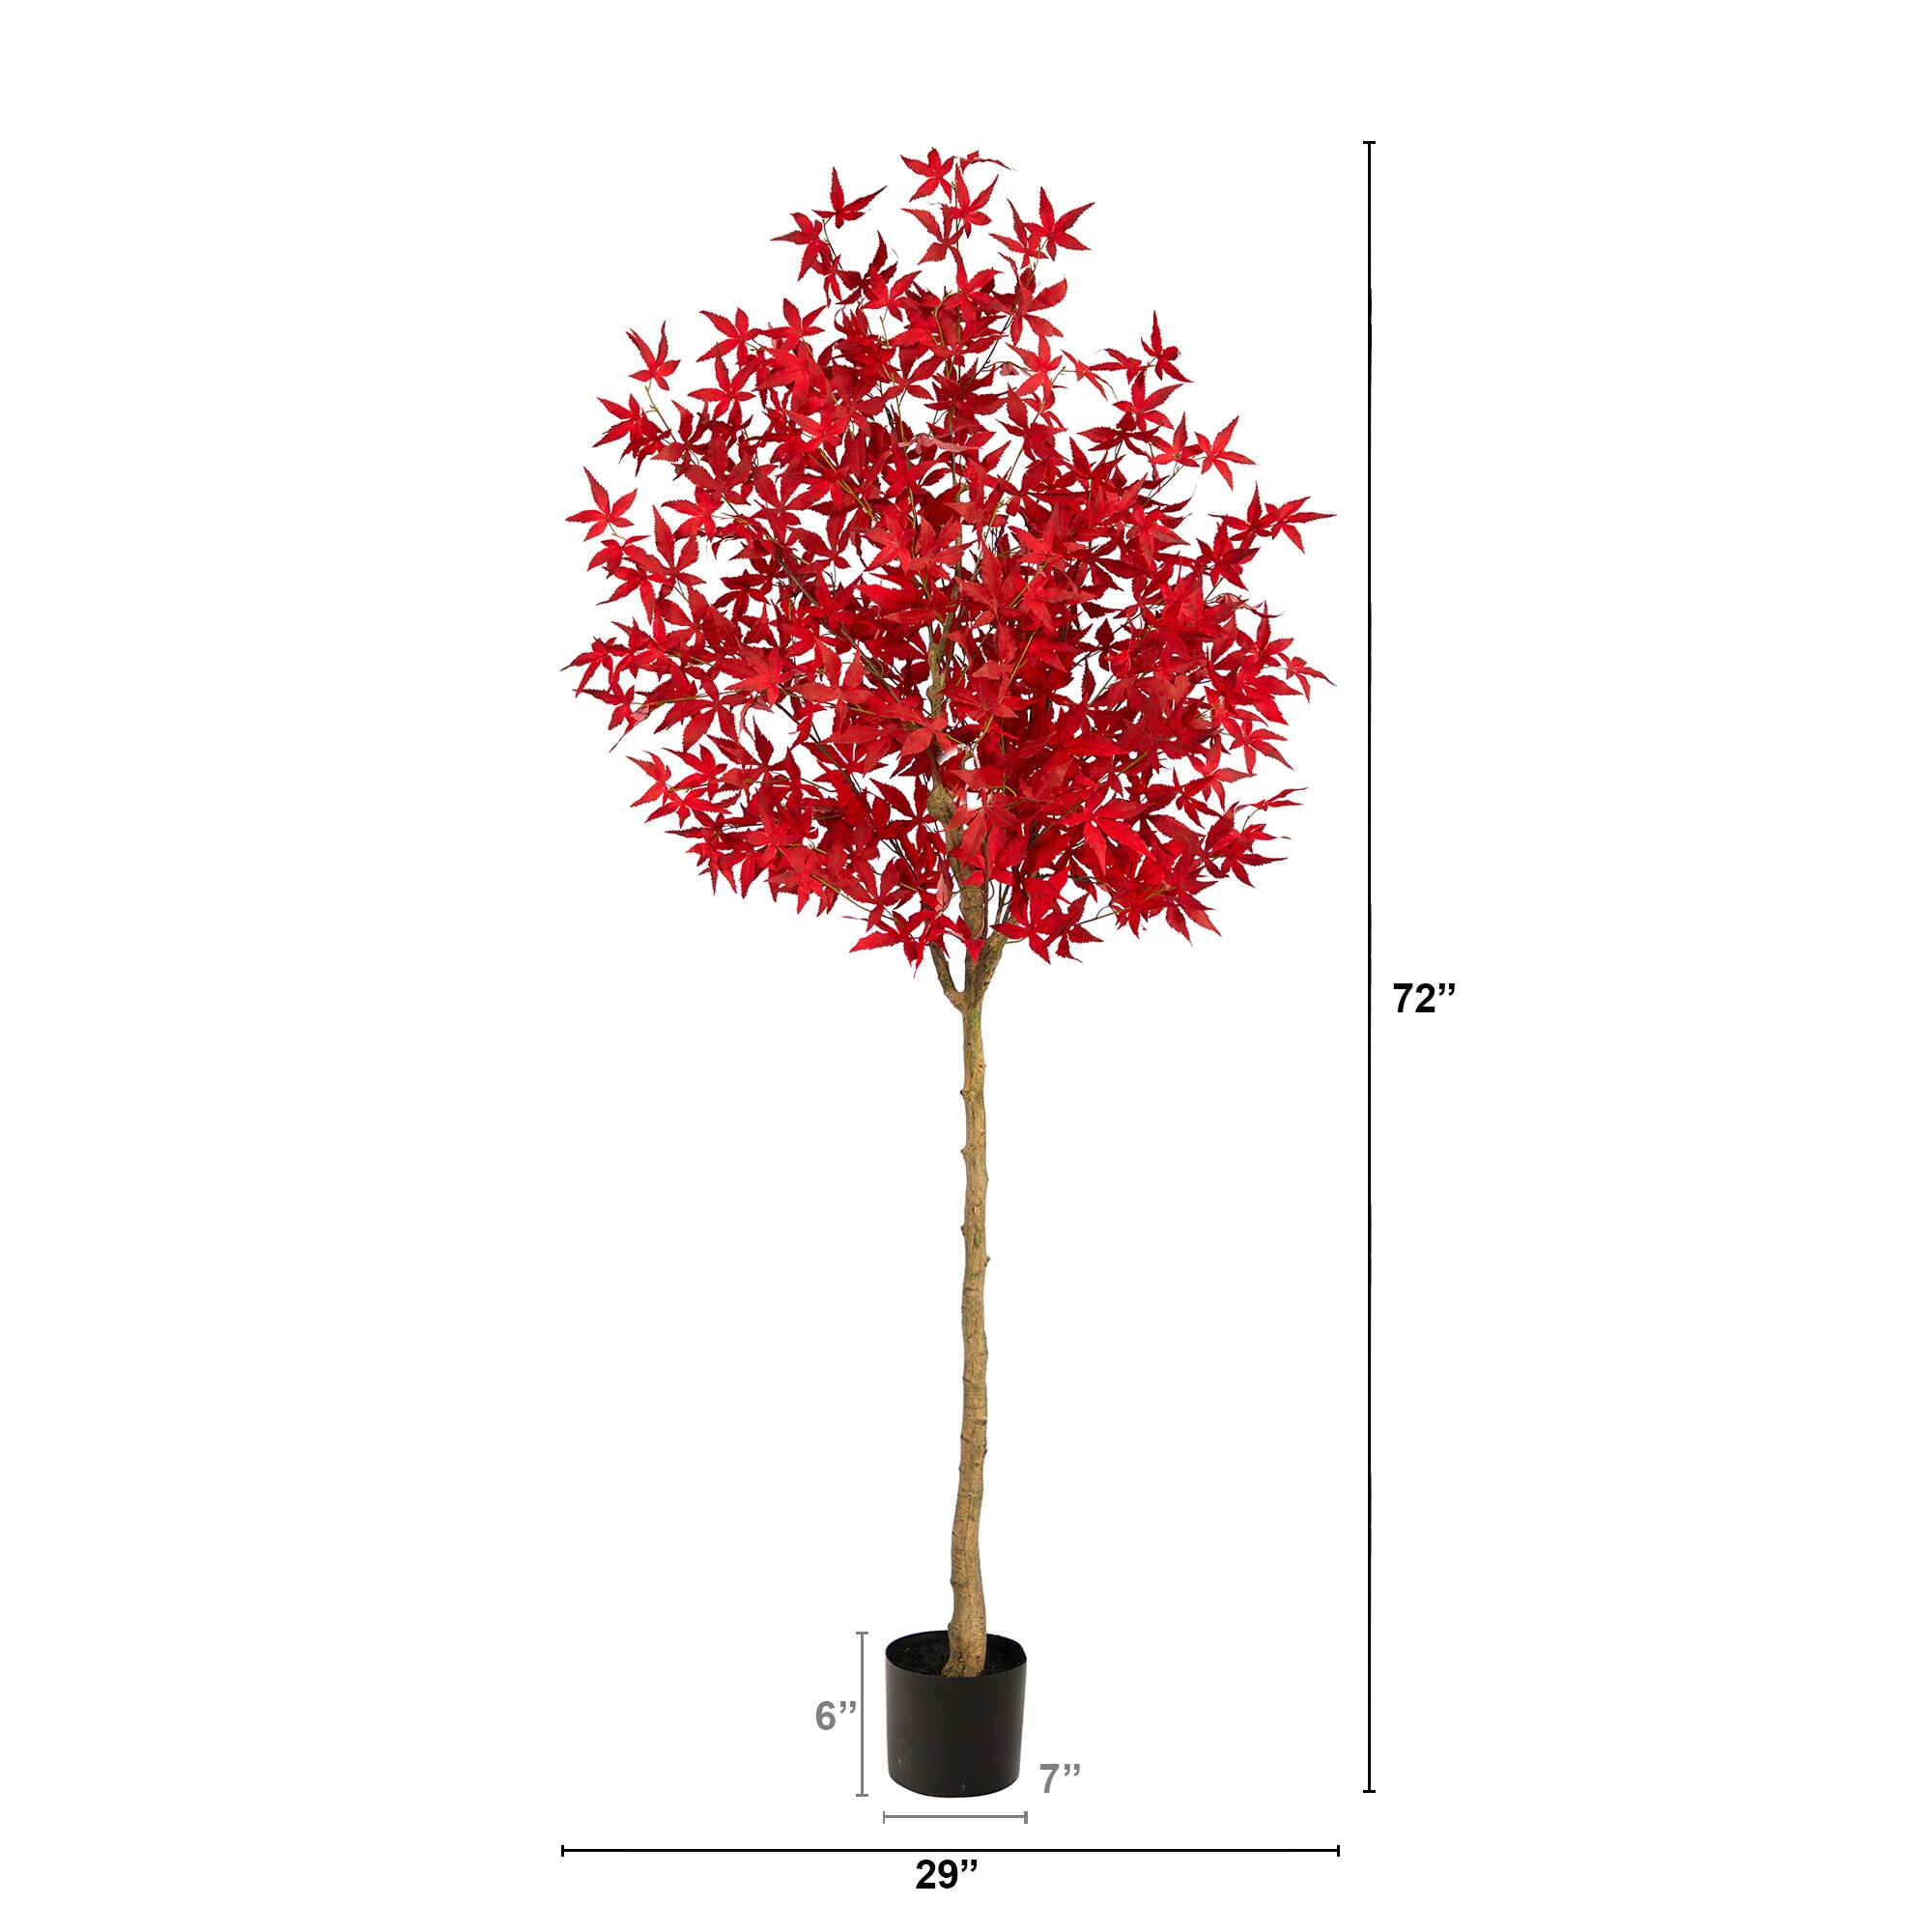 6ft. Red-Orange Autumn Maple Artificial Fall Tree